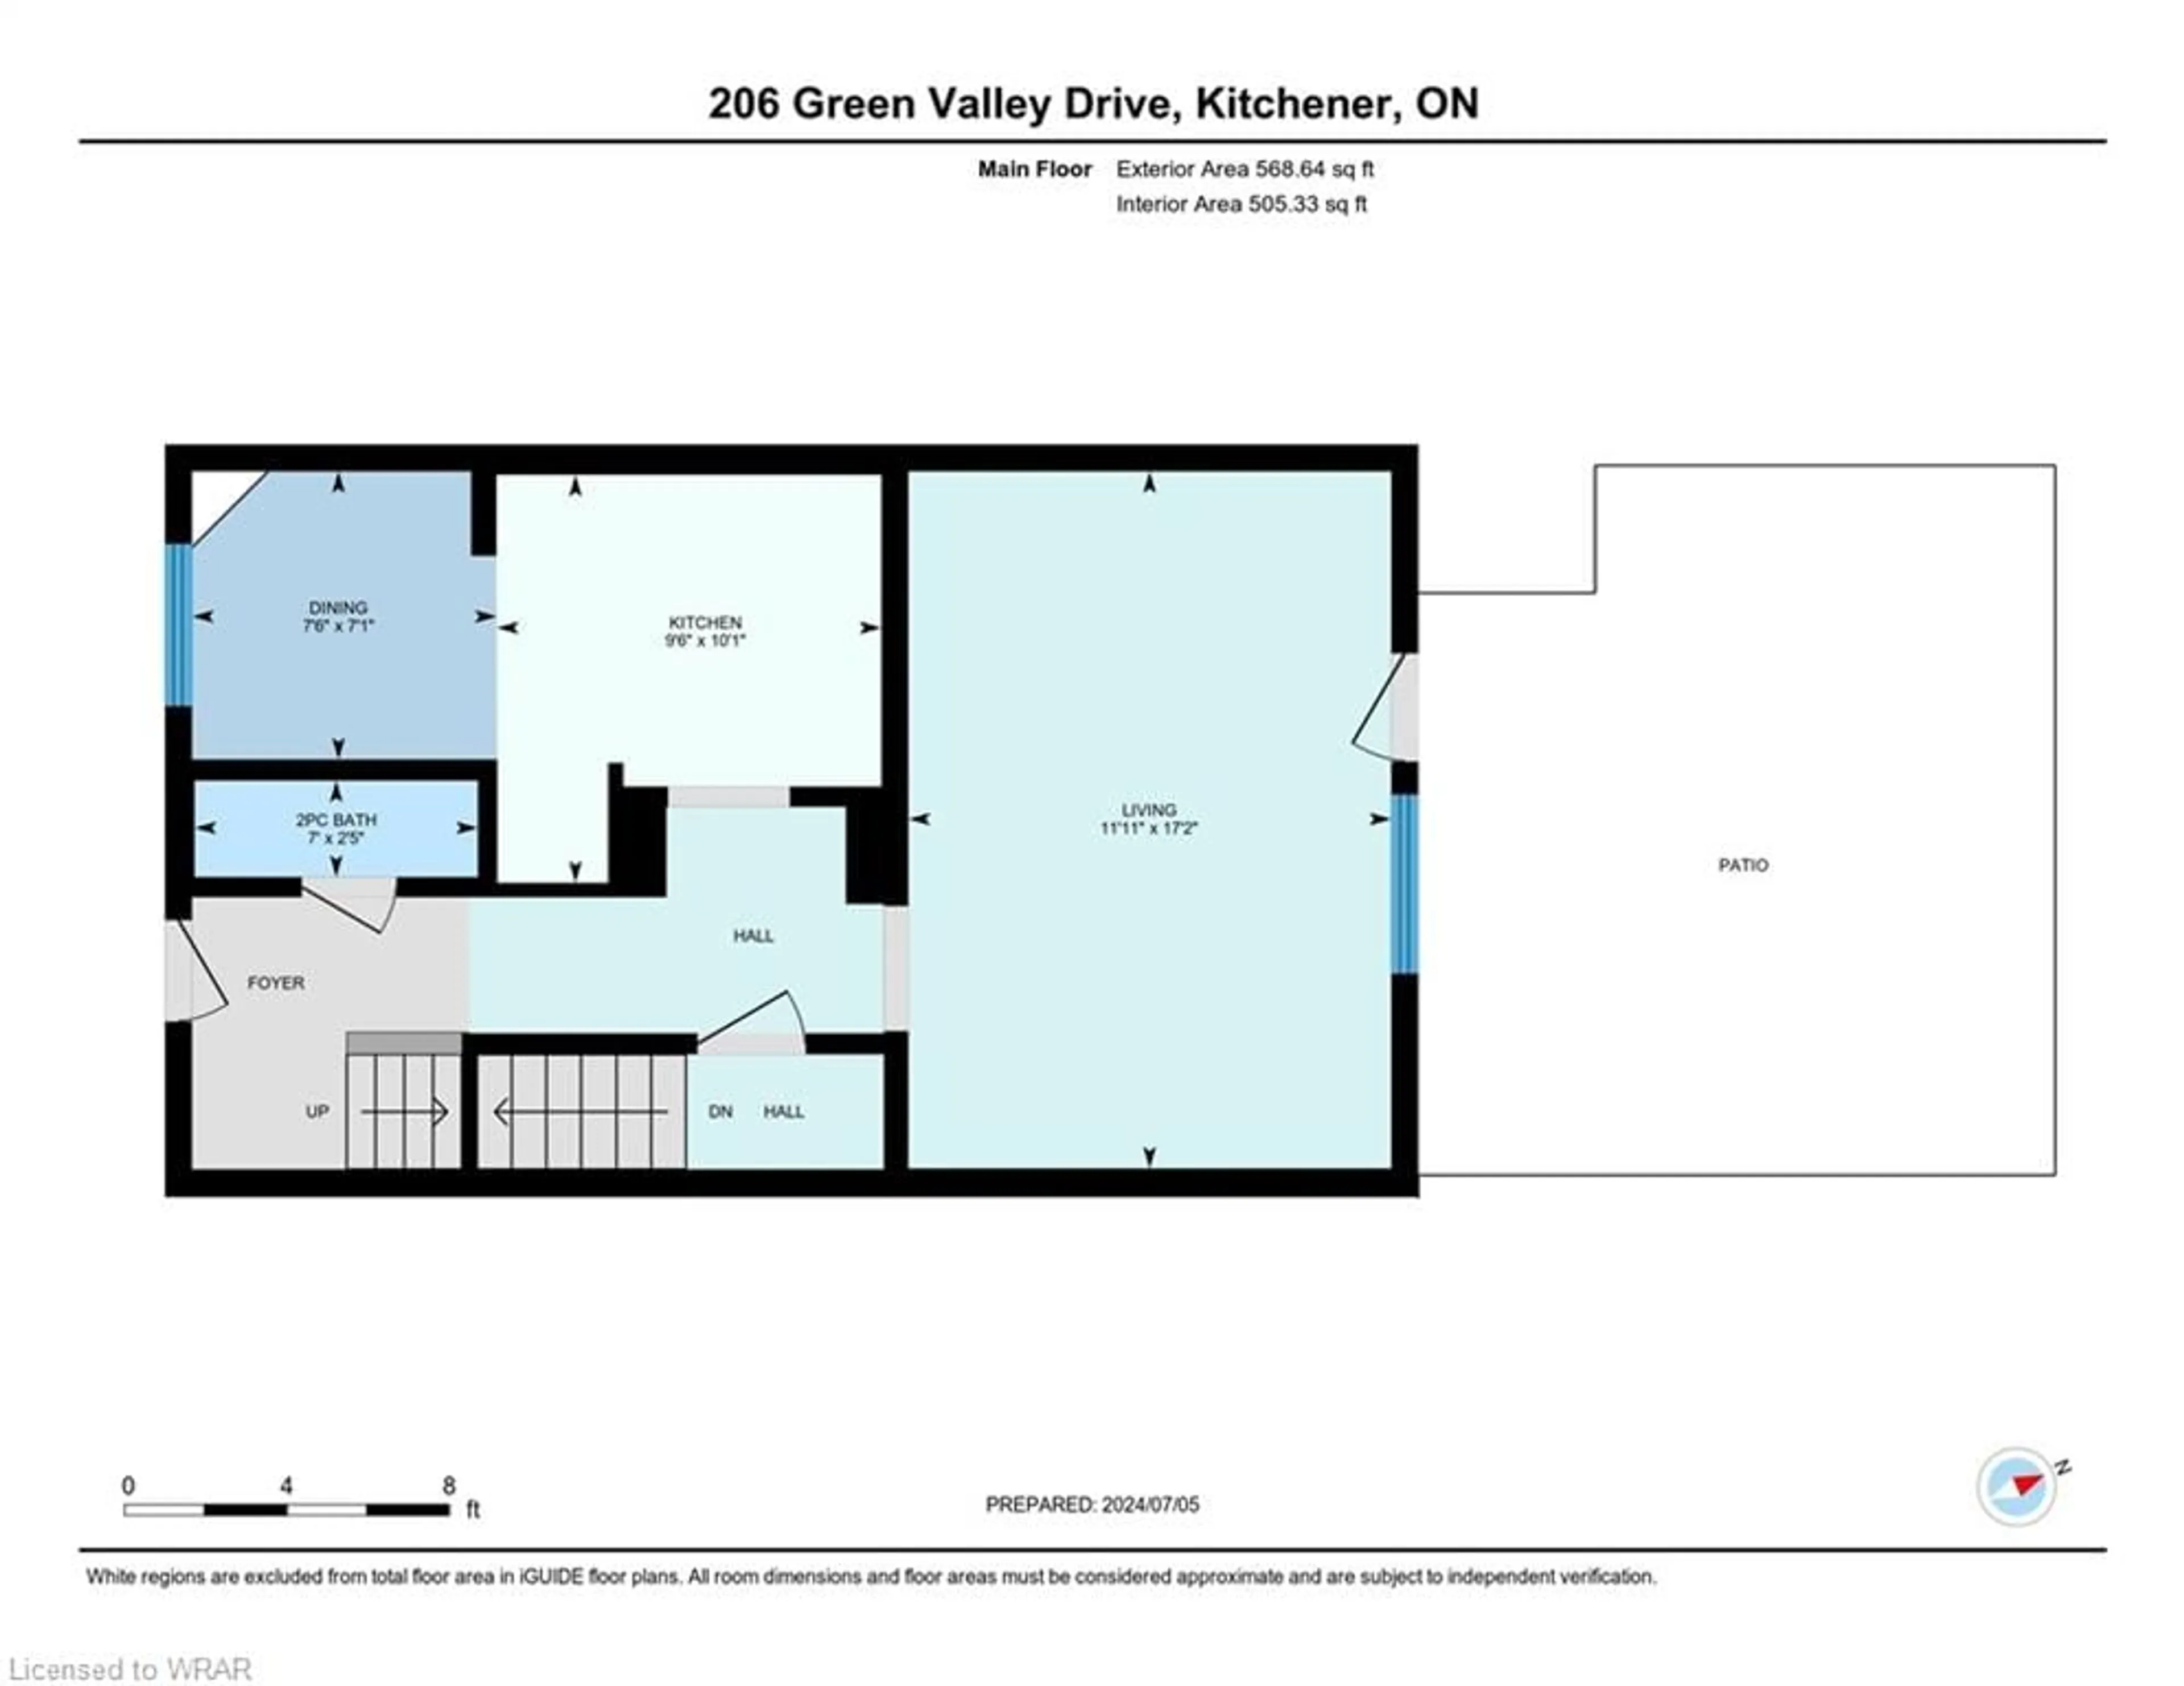 Floor plan for 206 Green Valley Dr #28, Kitchener Ontario N2P 1G9